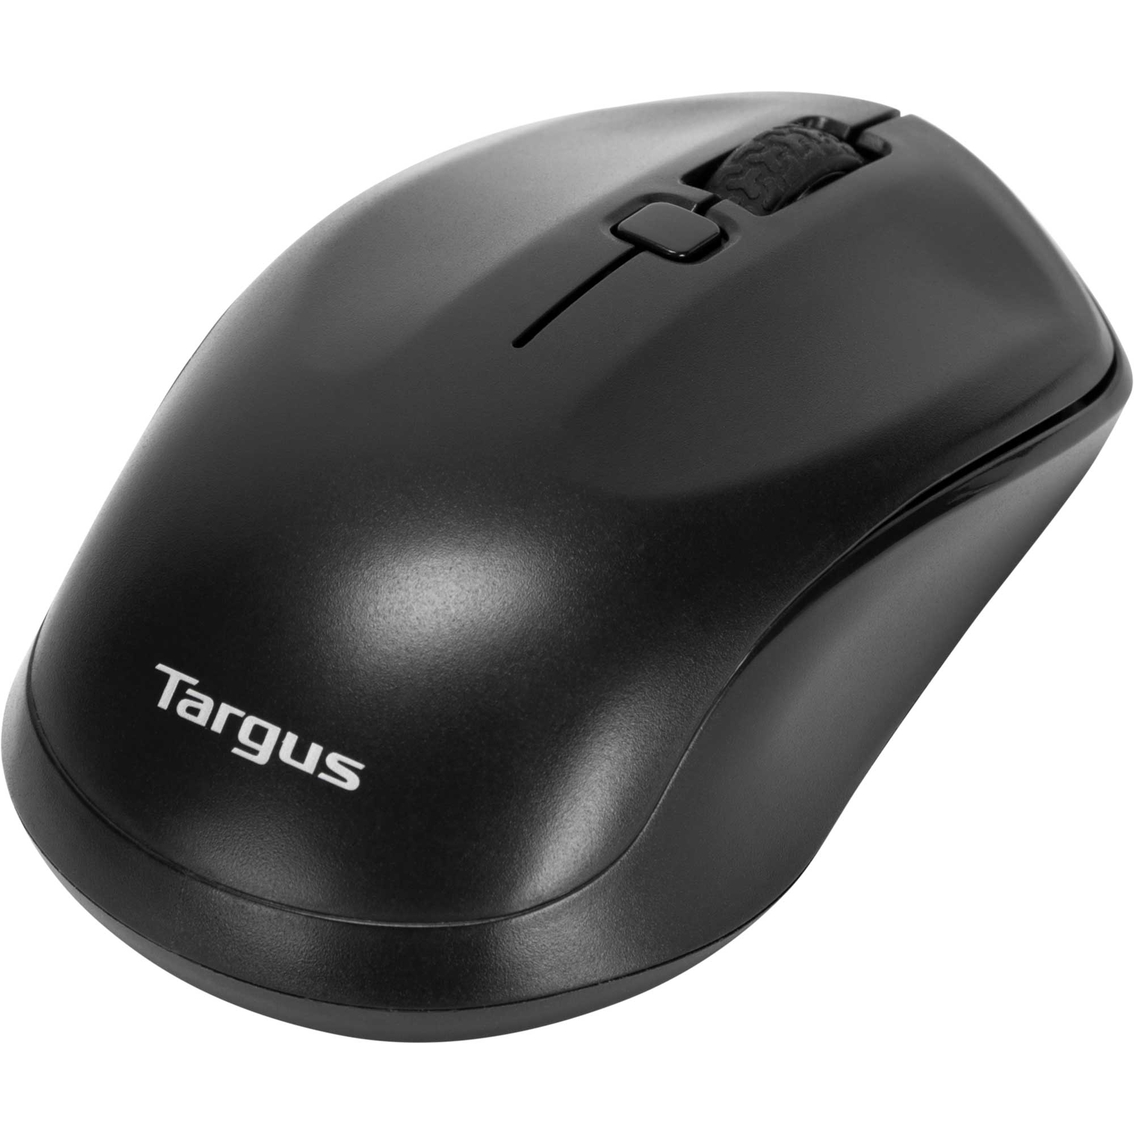 Targus Wireless Keyboard and Mouse Combo - Image 5 of 6